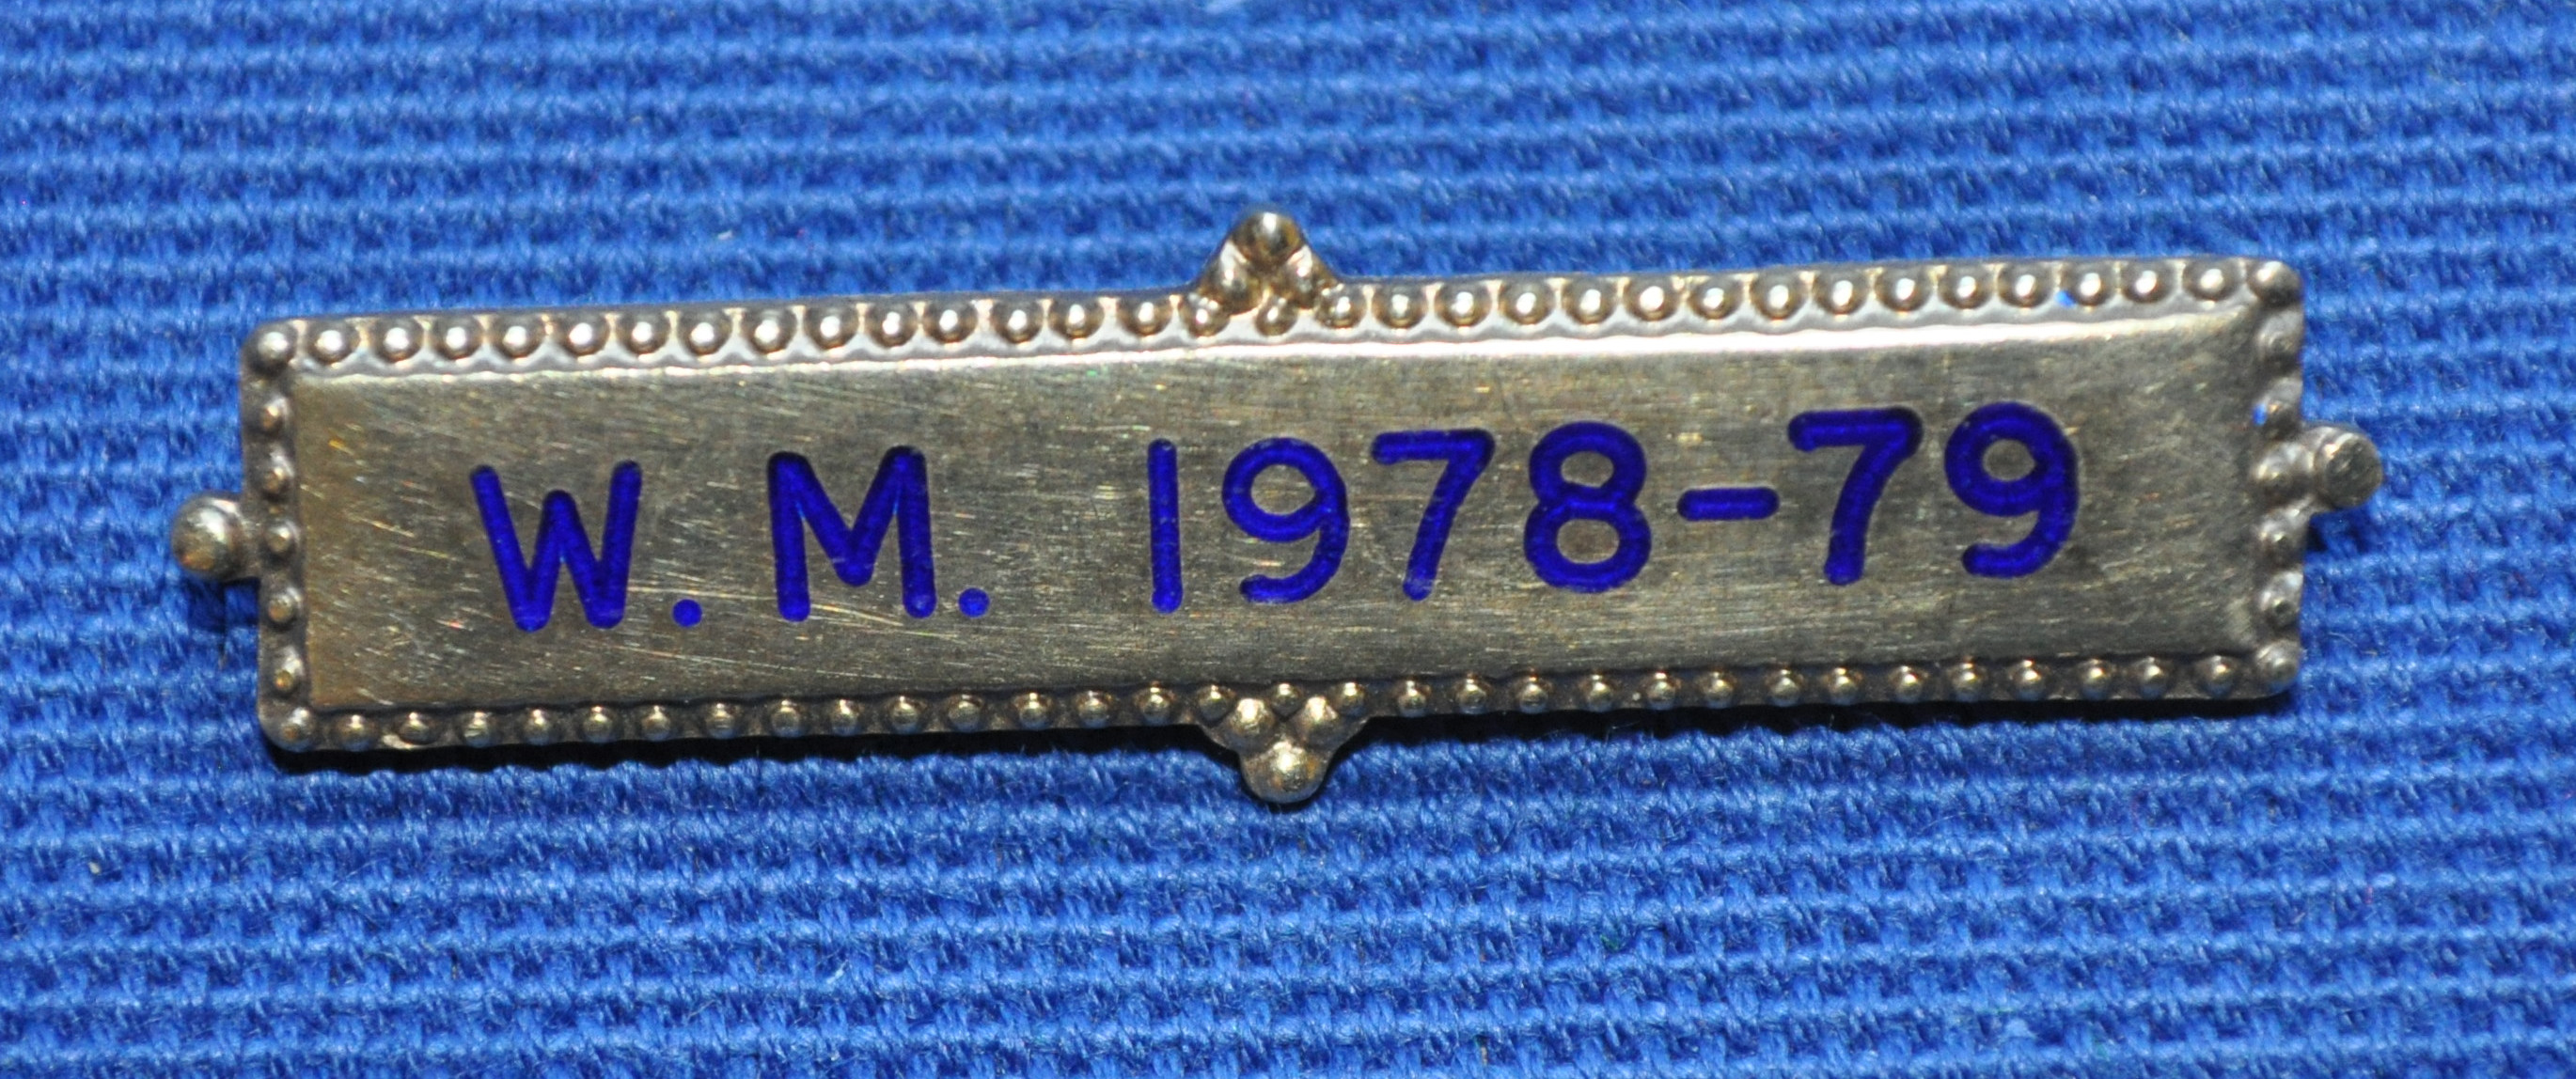 Breast Jewel Middle Date Bar 'WM 1978-79 - Engraved